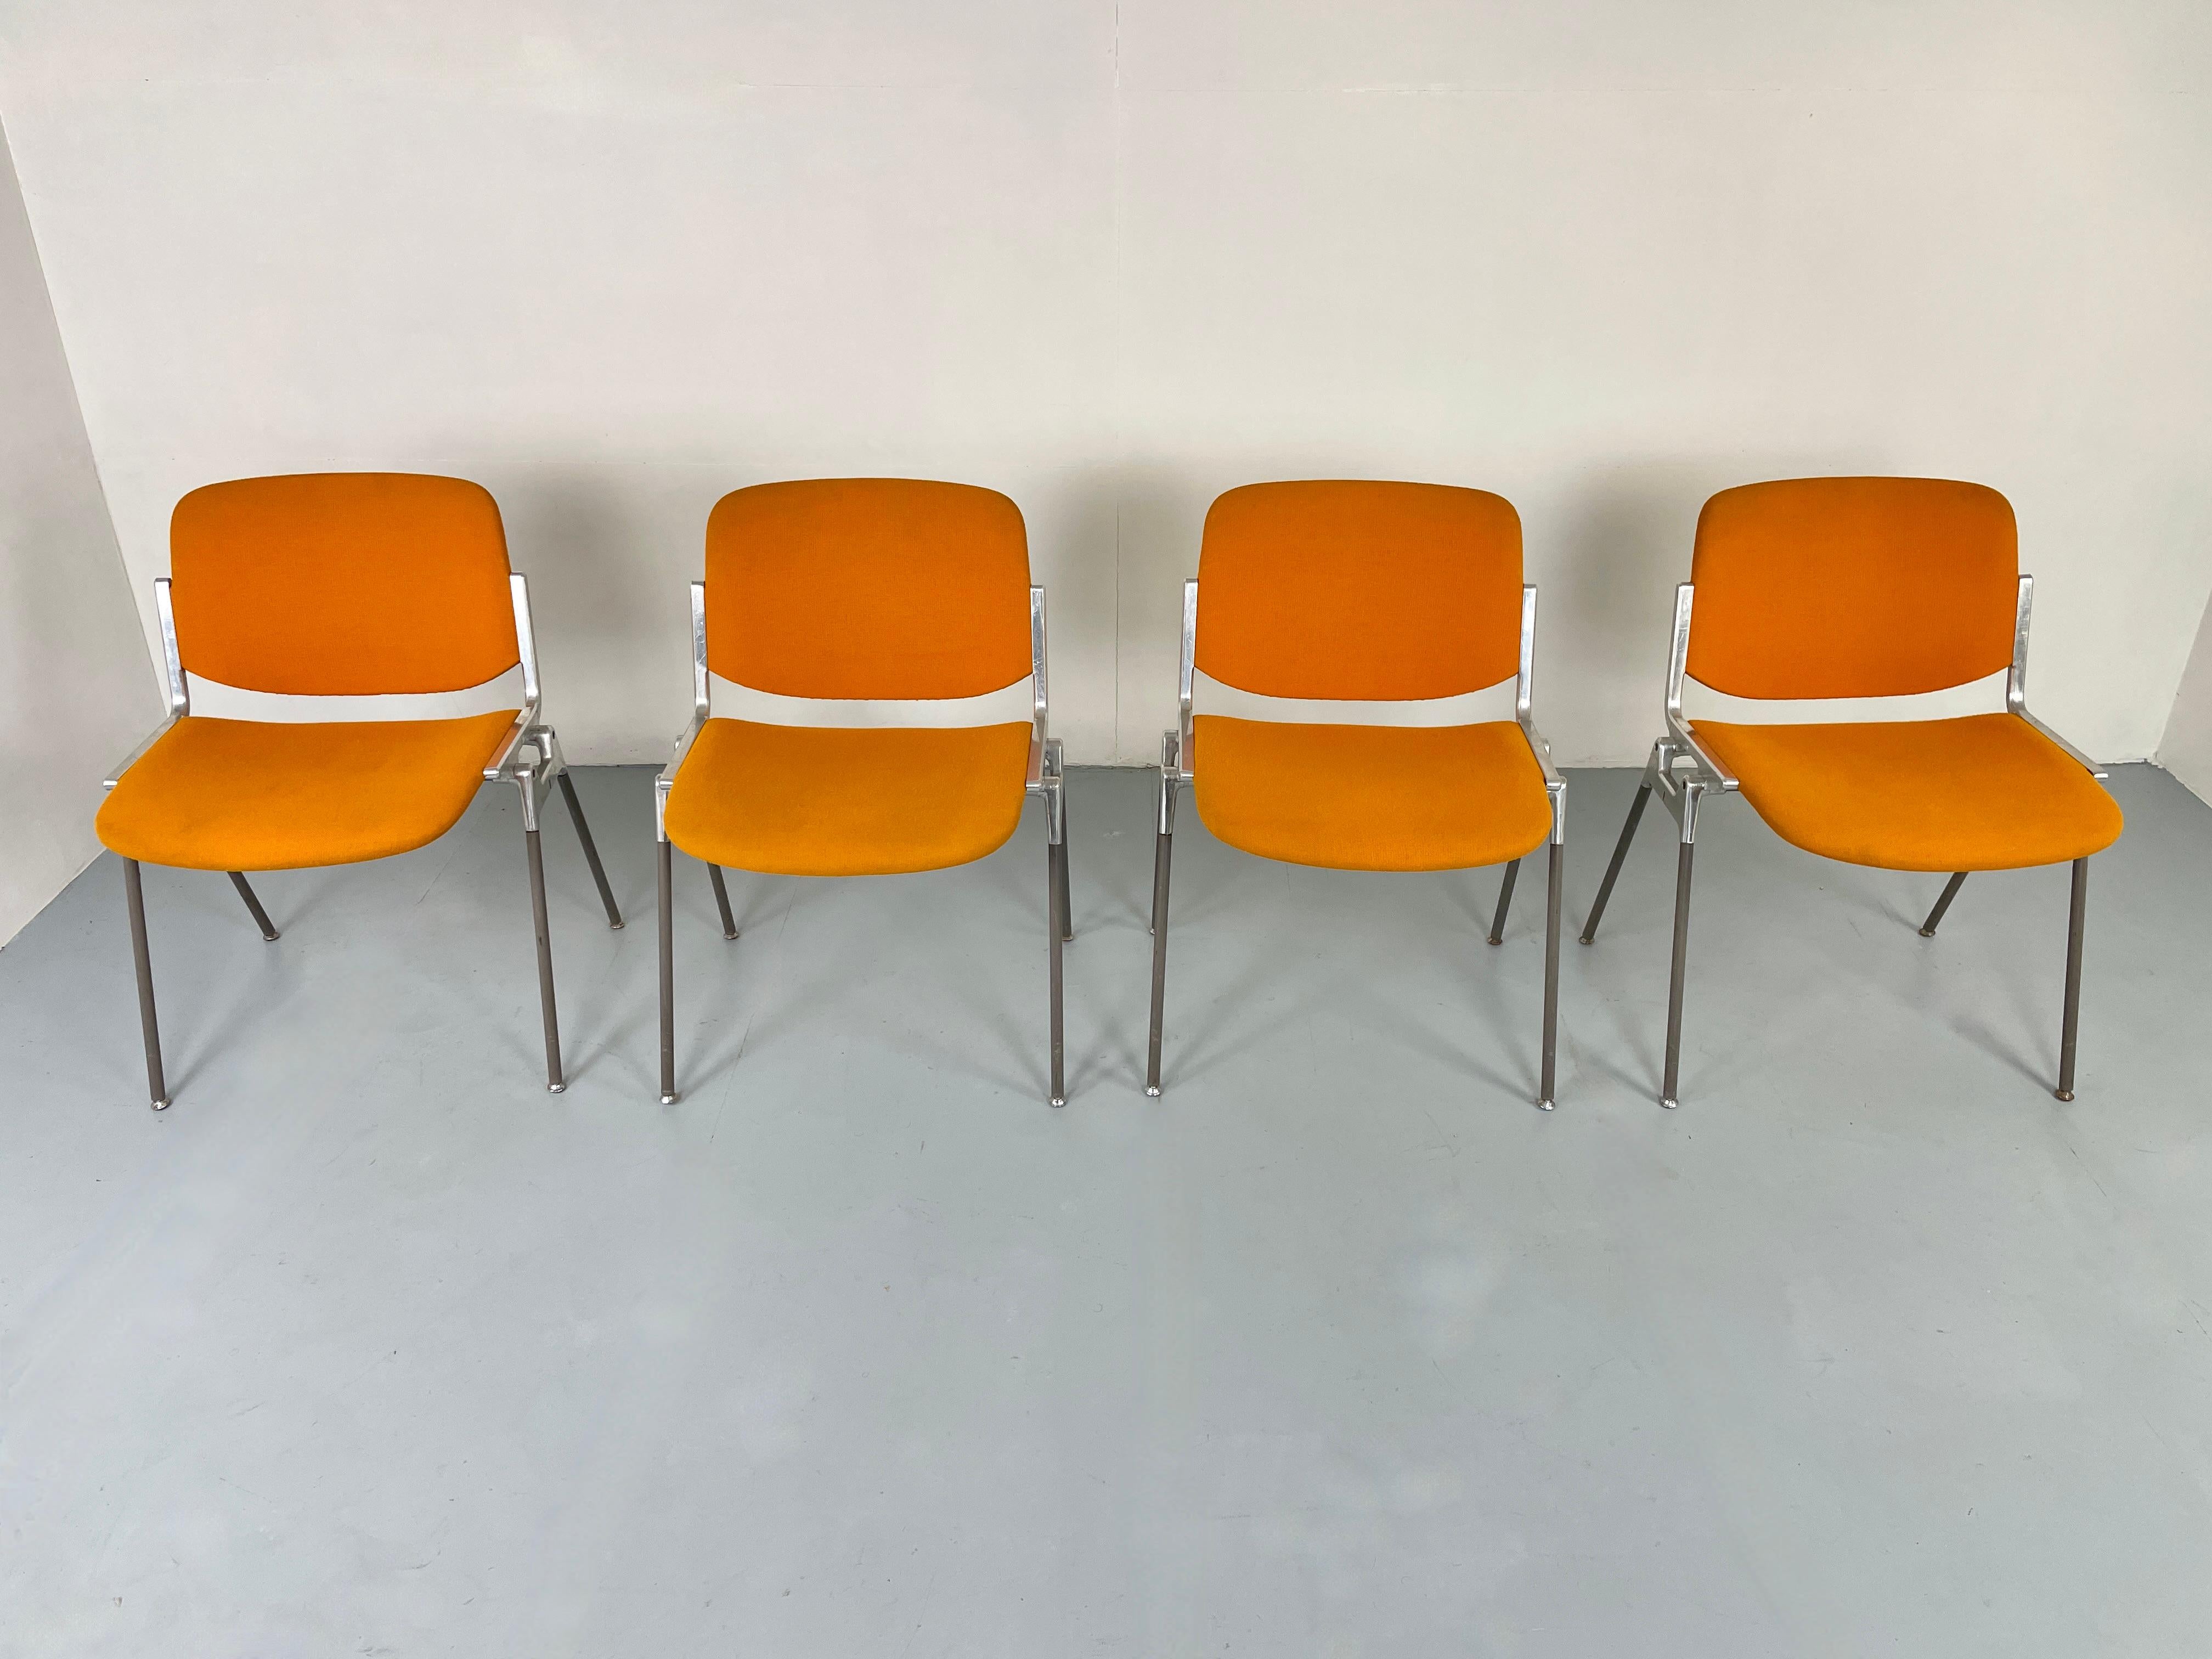 Iconic Italian stacking chairs by Giancarlo Piretti for Anonima Castelli.

DSC 106 is one of the most famous chairs of the castelli brand. designed in 1965 by giancarlo piretti, it is still an object with an innovative and fascinating